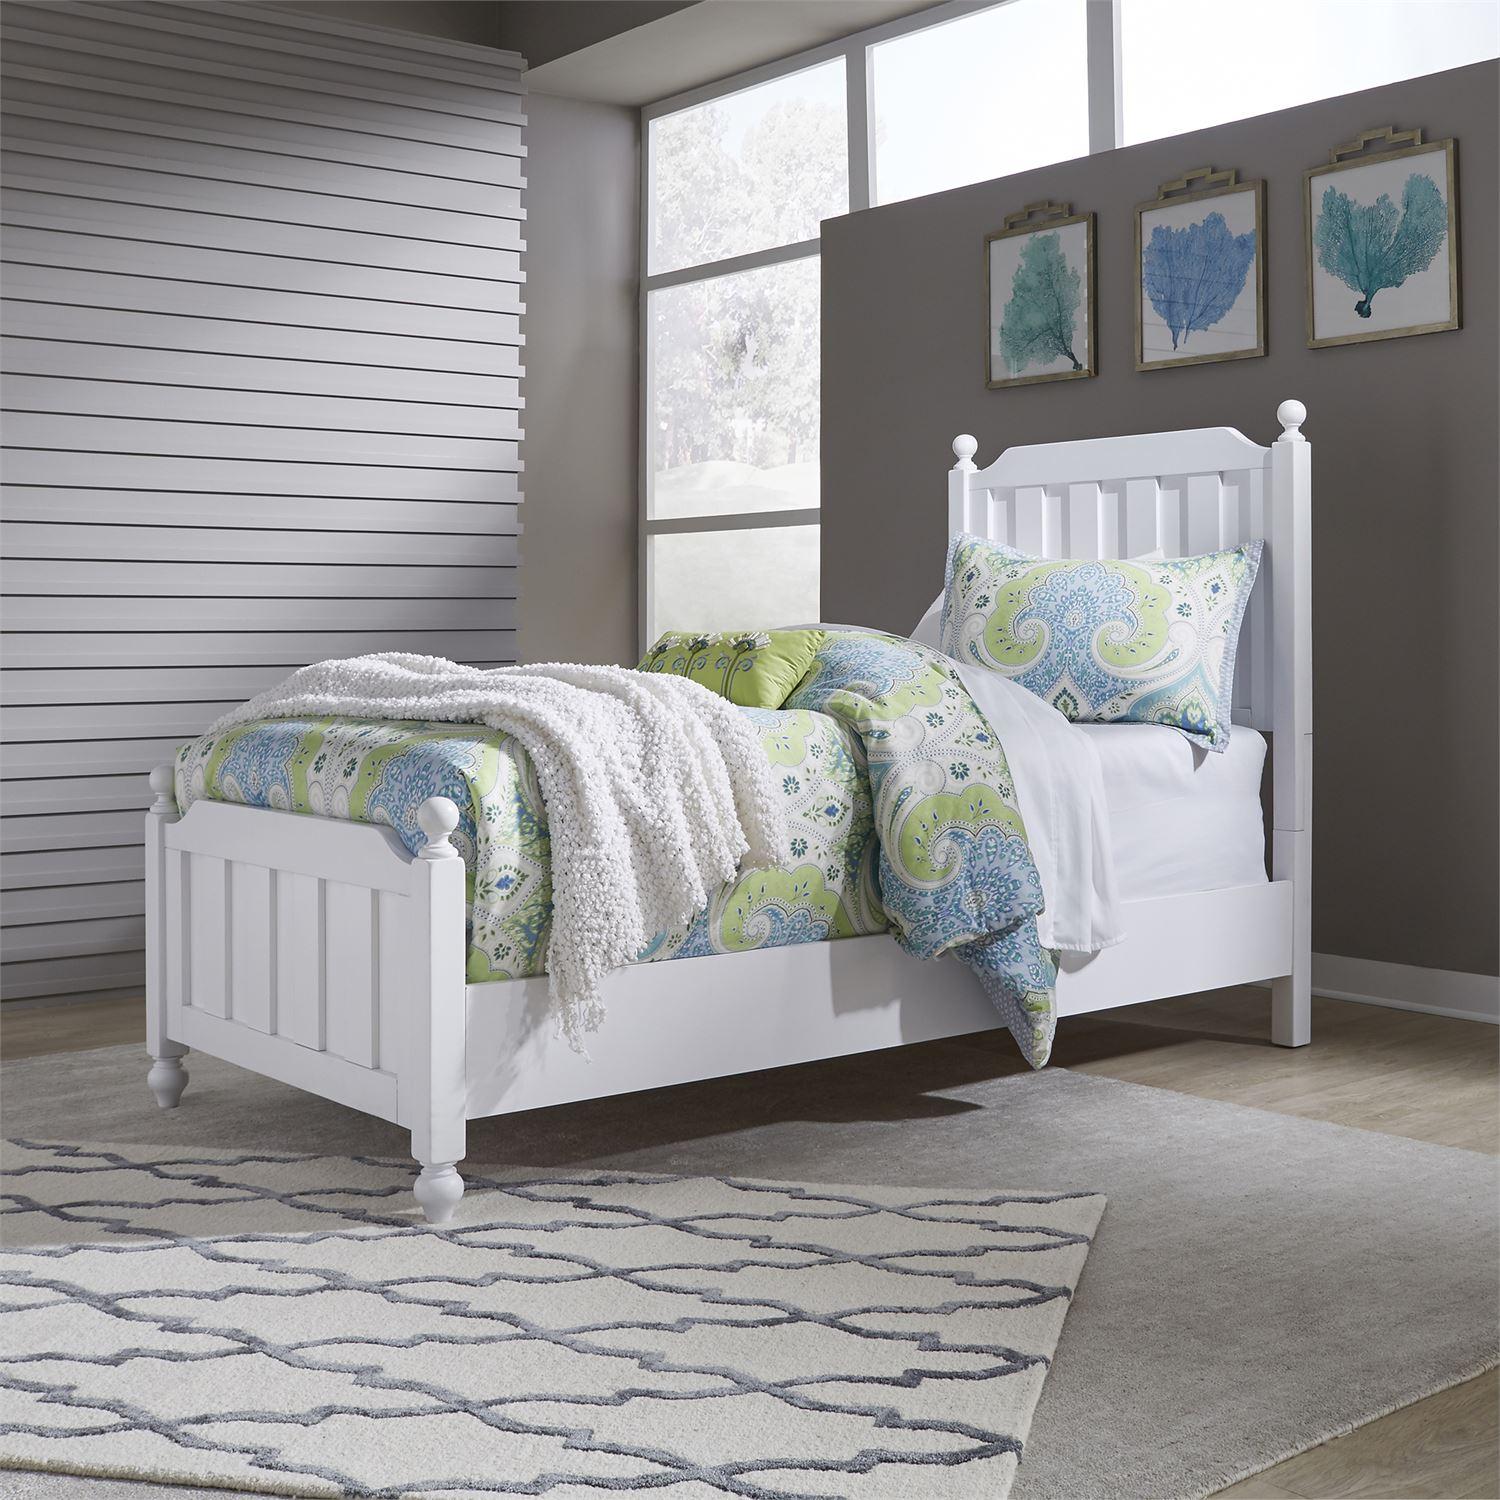 

    
Cottage White Wood Panel Bed Cottage View (523-YBR) Liberty Furniture
